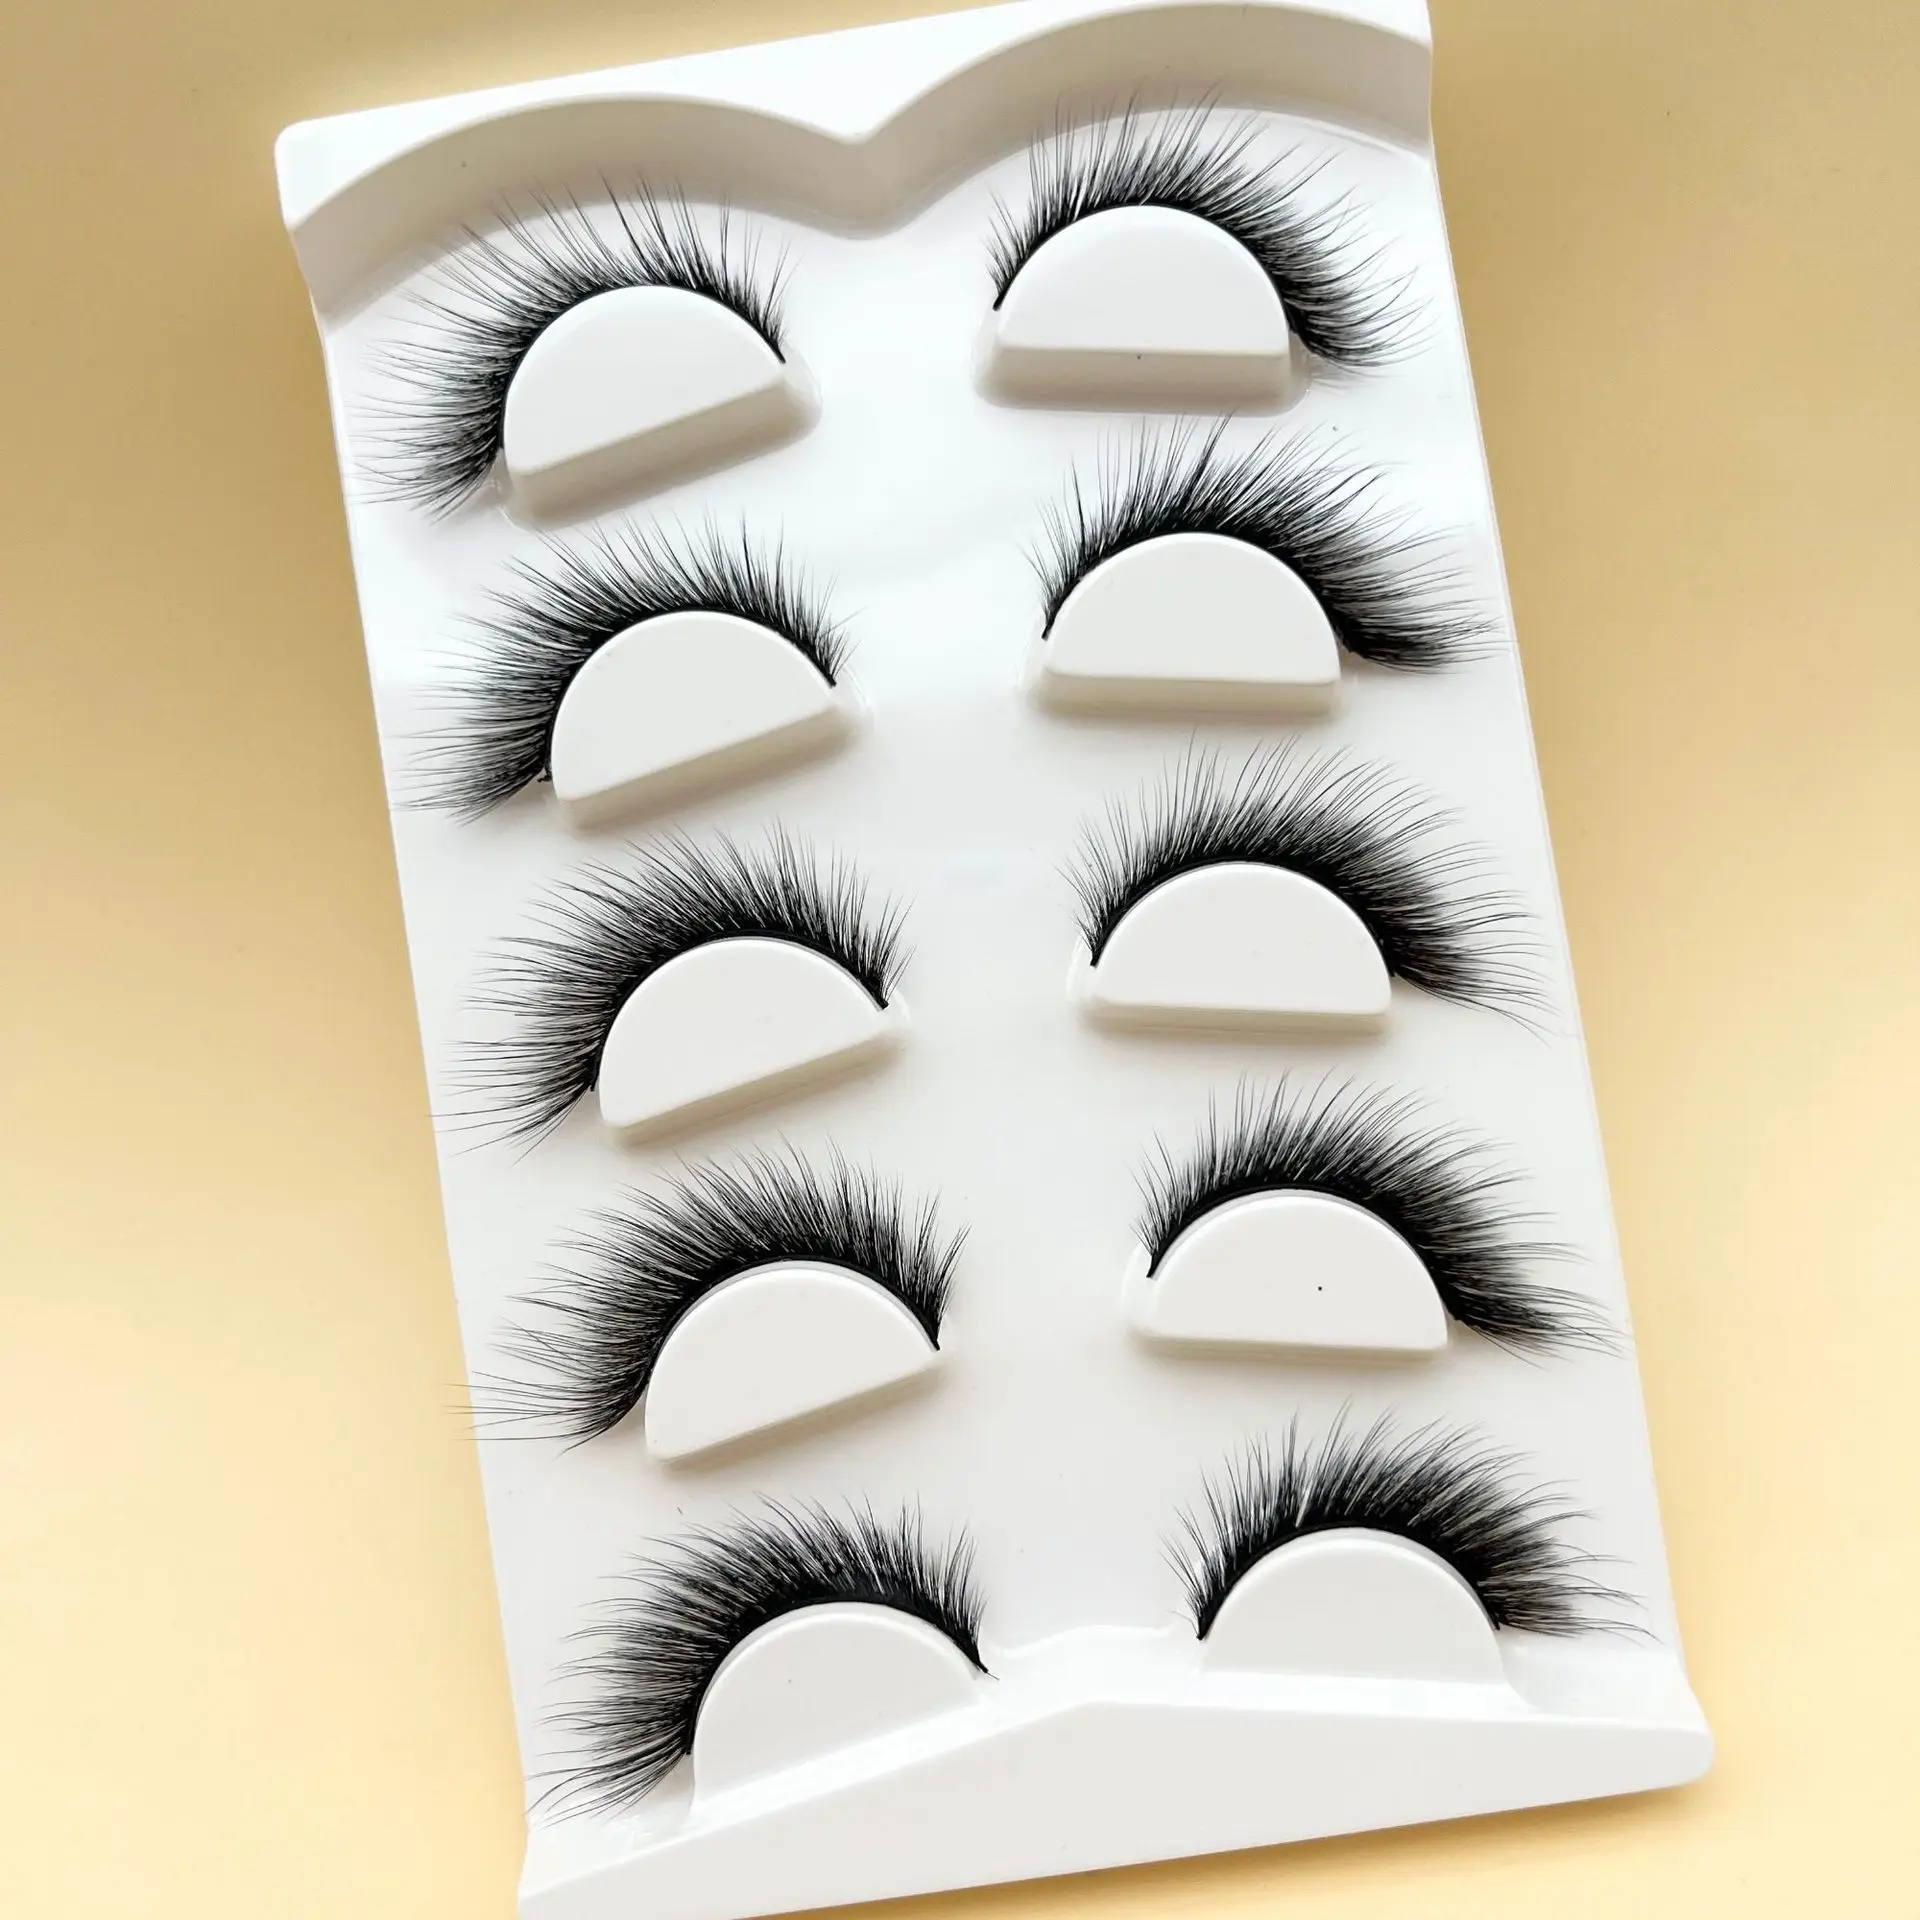 5 Pairs Faux Mink Cat Eye False Eyelashes with Extra Long & Voluminous Effect for Natural & Glamorous Look Comfortable to Wear